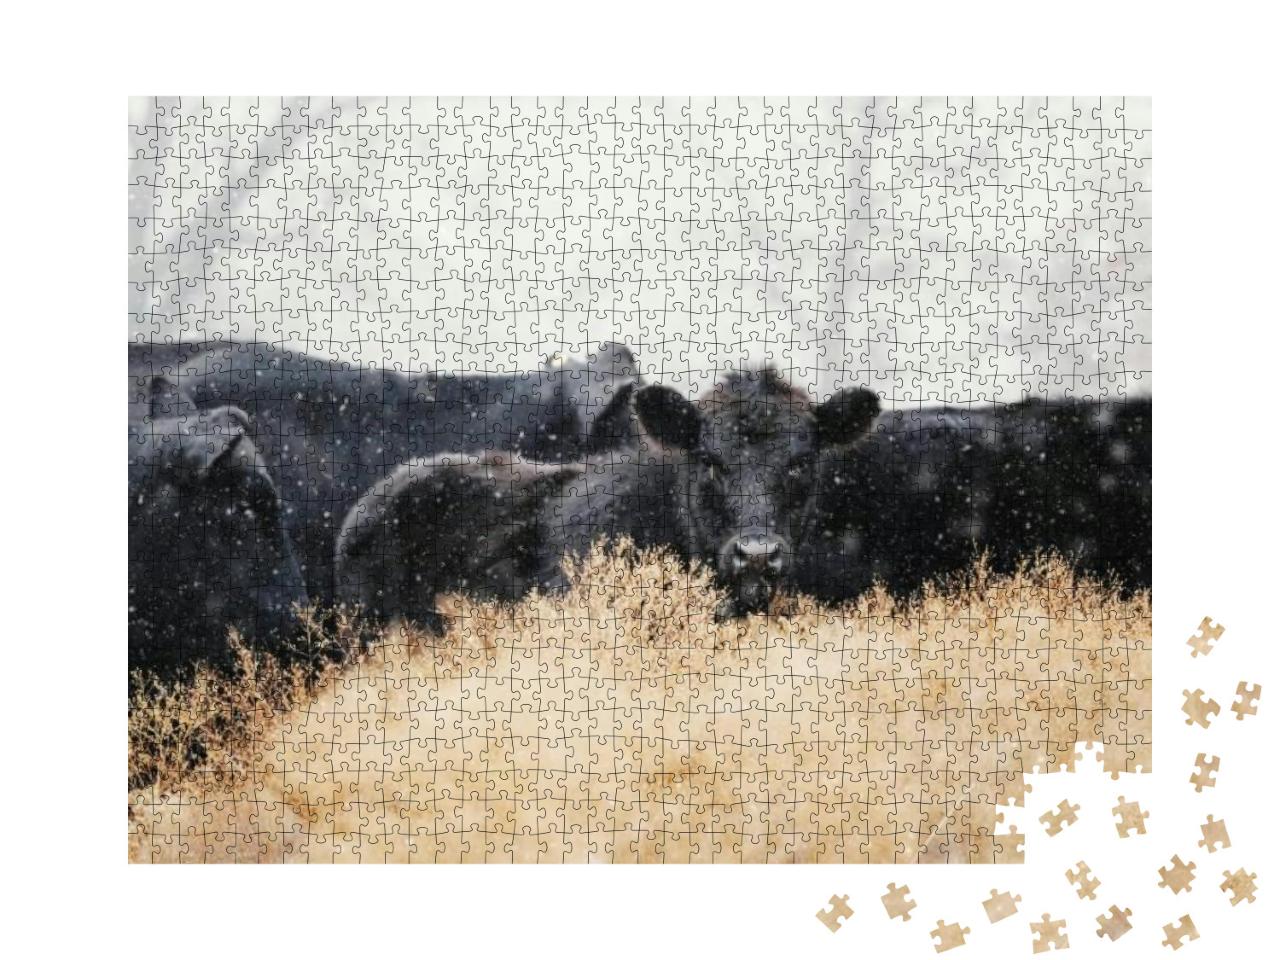 Black Angus Calves with Beef Herd of Cows in Snow on Farm... Jigsaw Puzzle with 1000 pieces